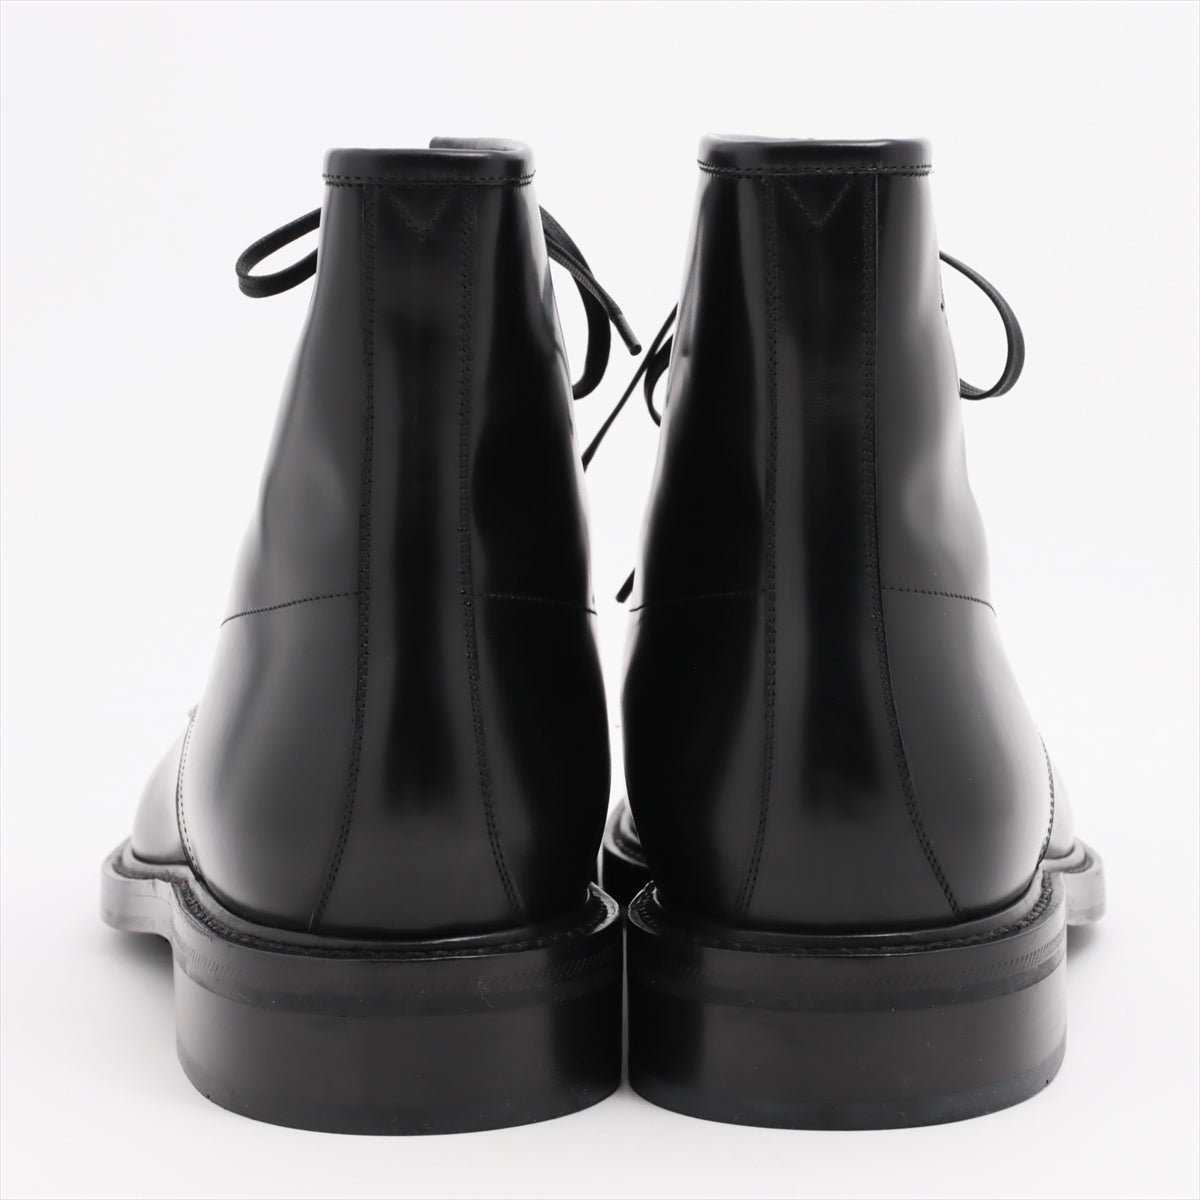 Louis Vuitton 16 years Leather Boots 9 1/2M Men's Black DI1106 Is there a replacement string